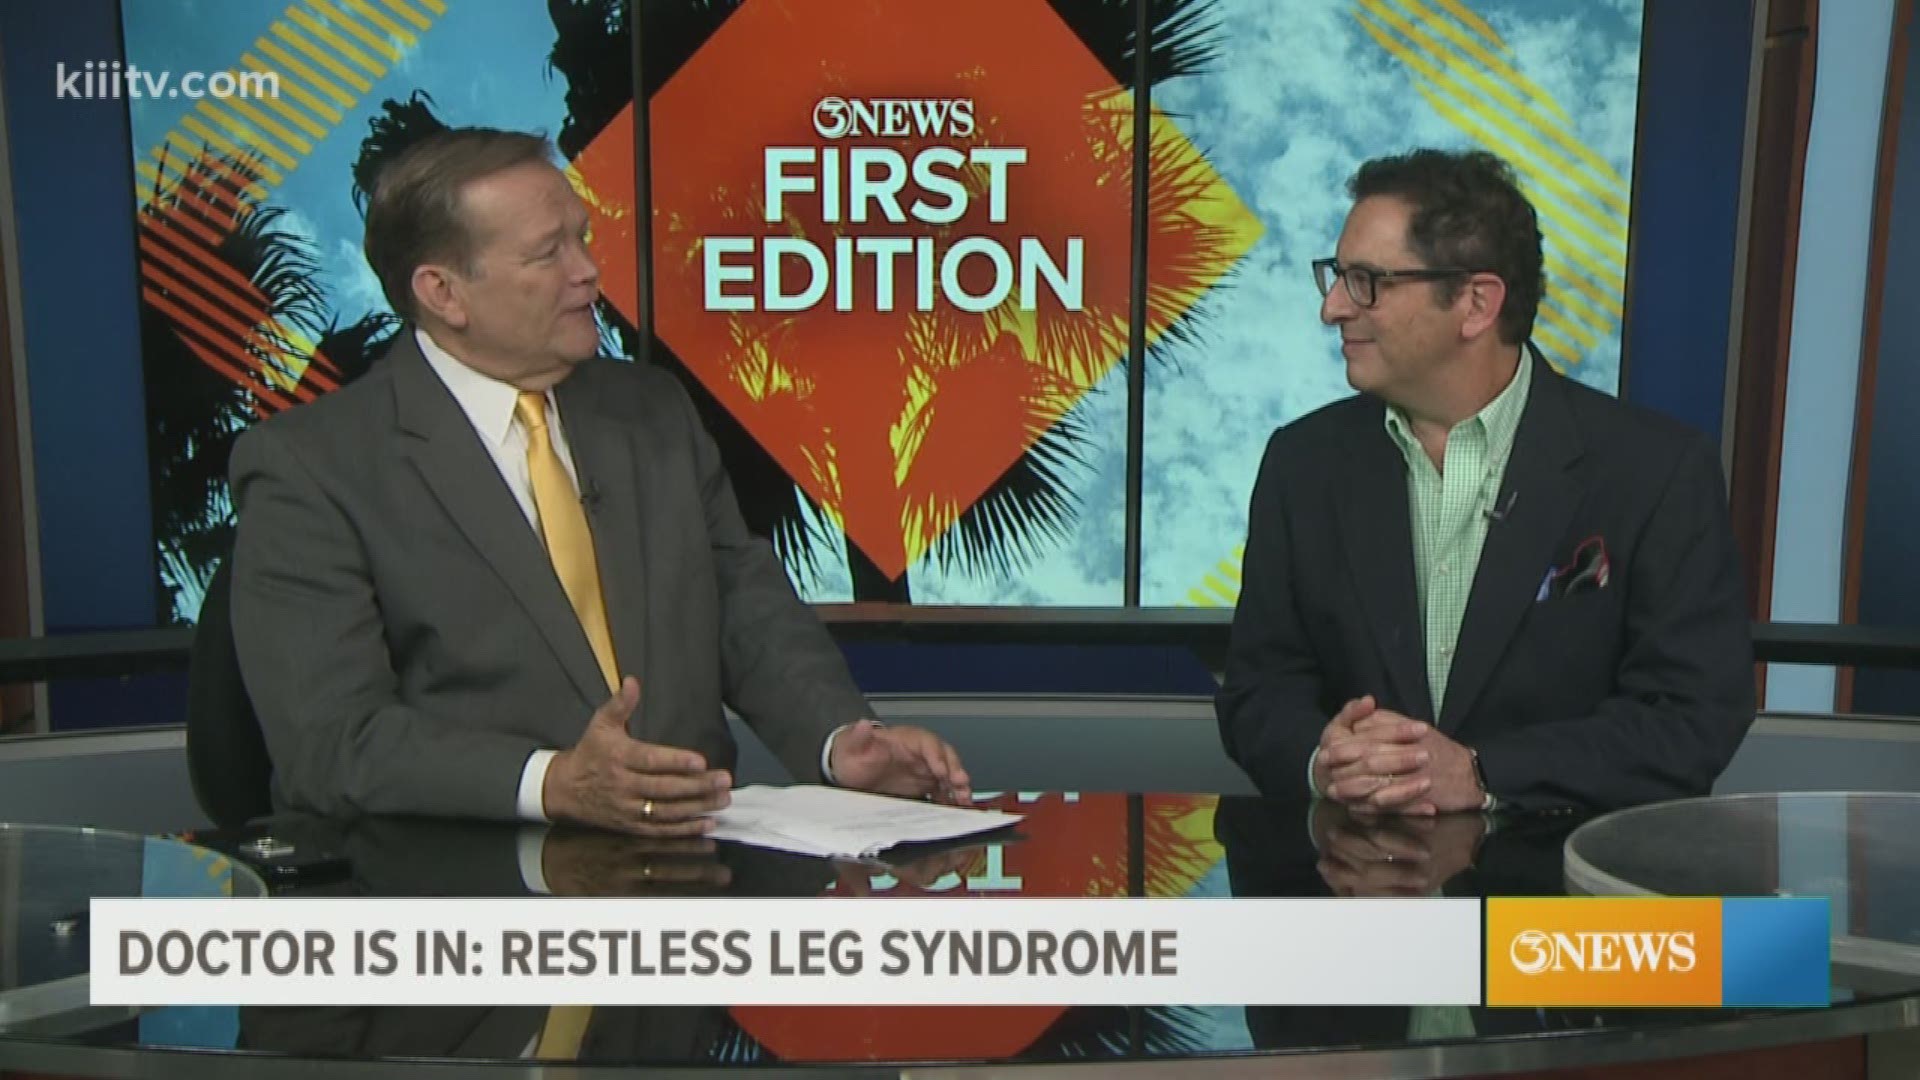 Discussing the condition known as Restless Leg Syndrome.